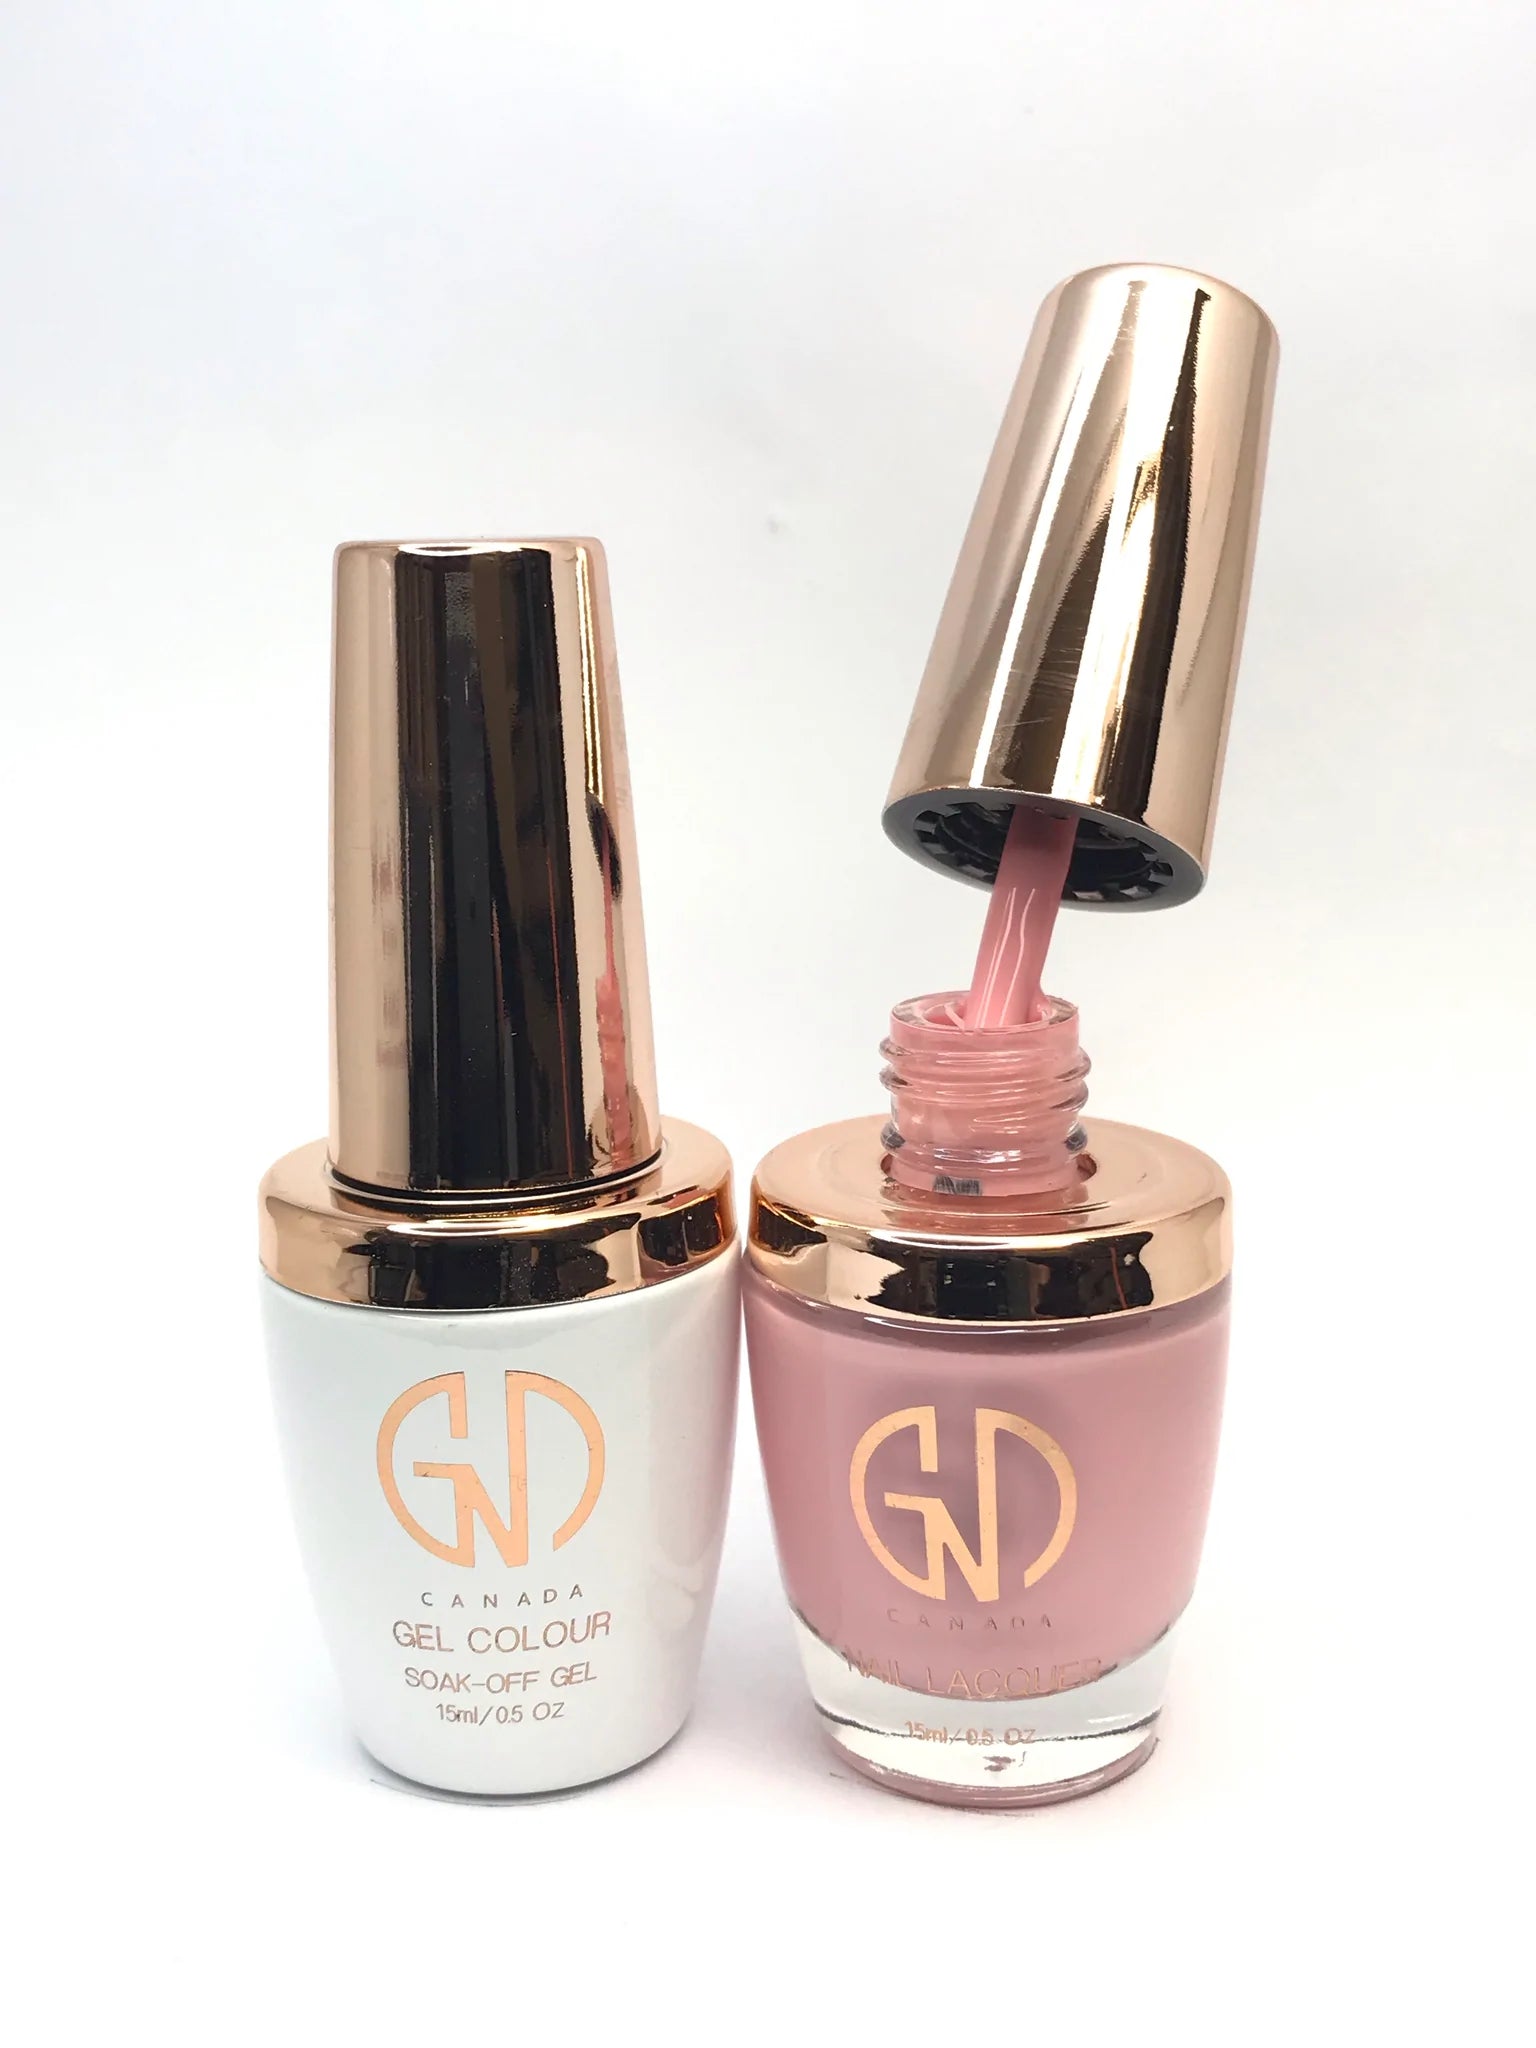 GND Duo Gel & Lacquer 026